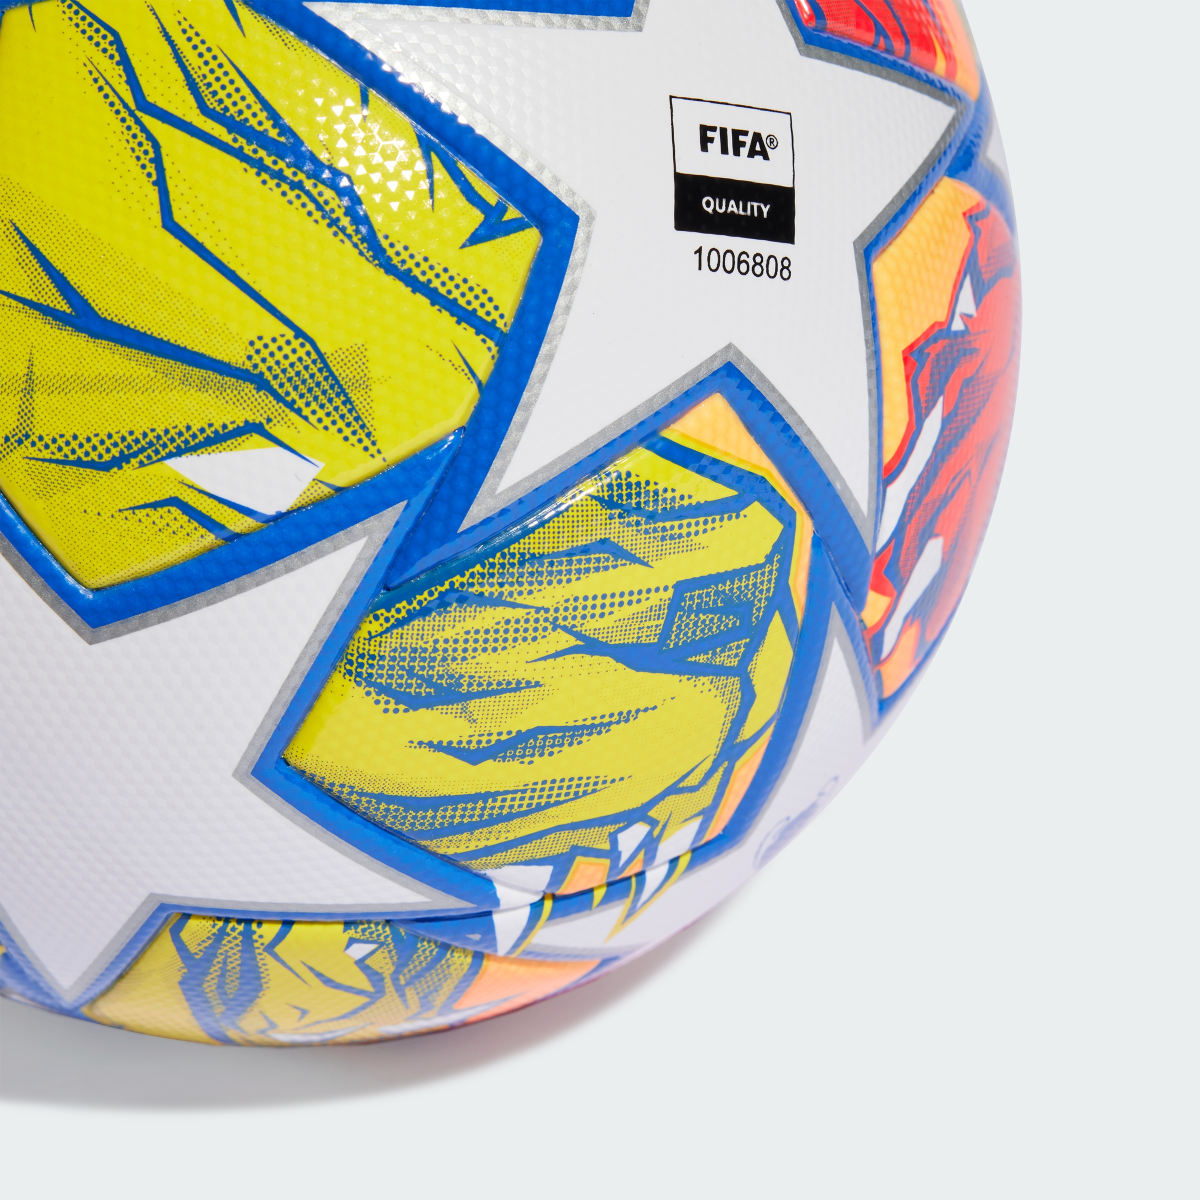 Adidas UCL League 23/24 Knock-out Ball. 5